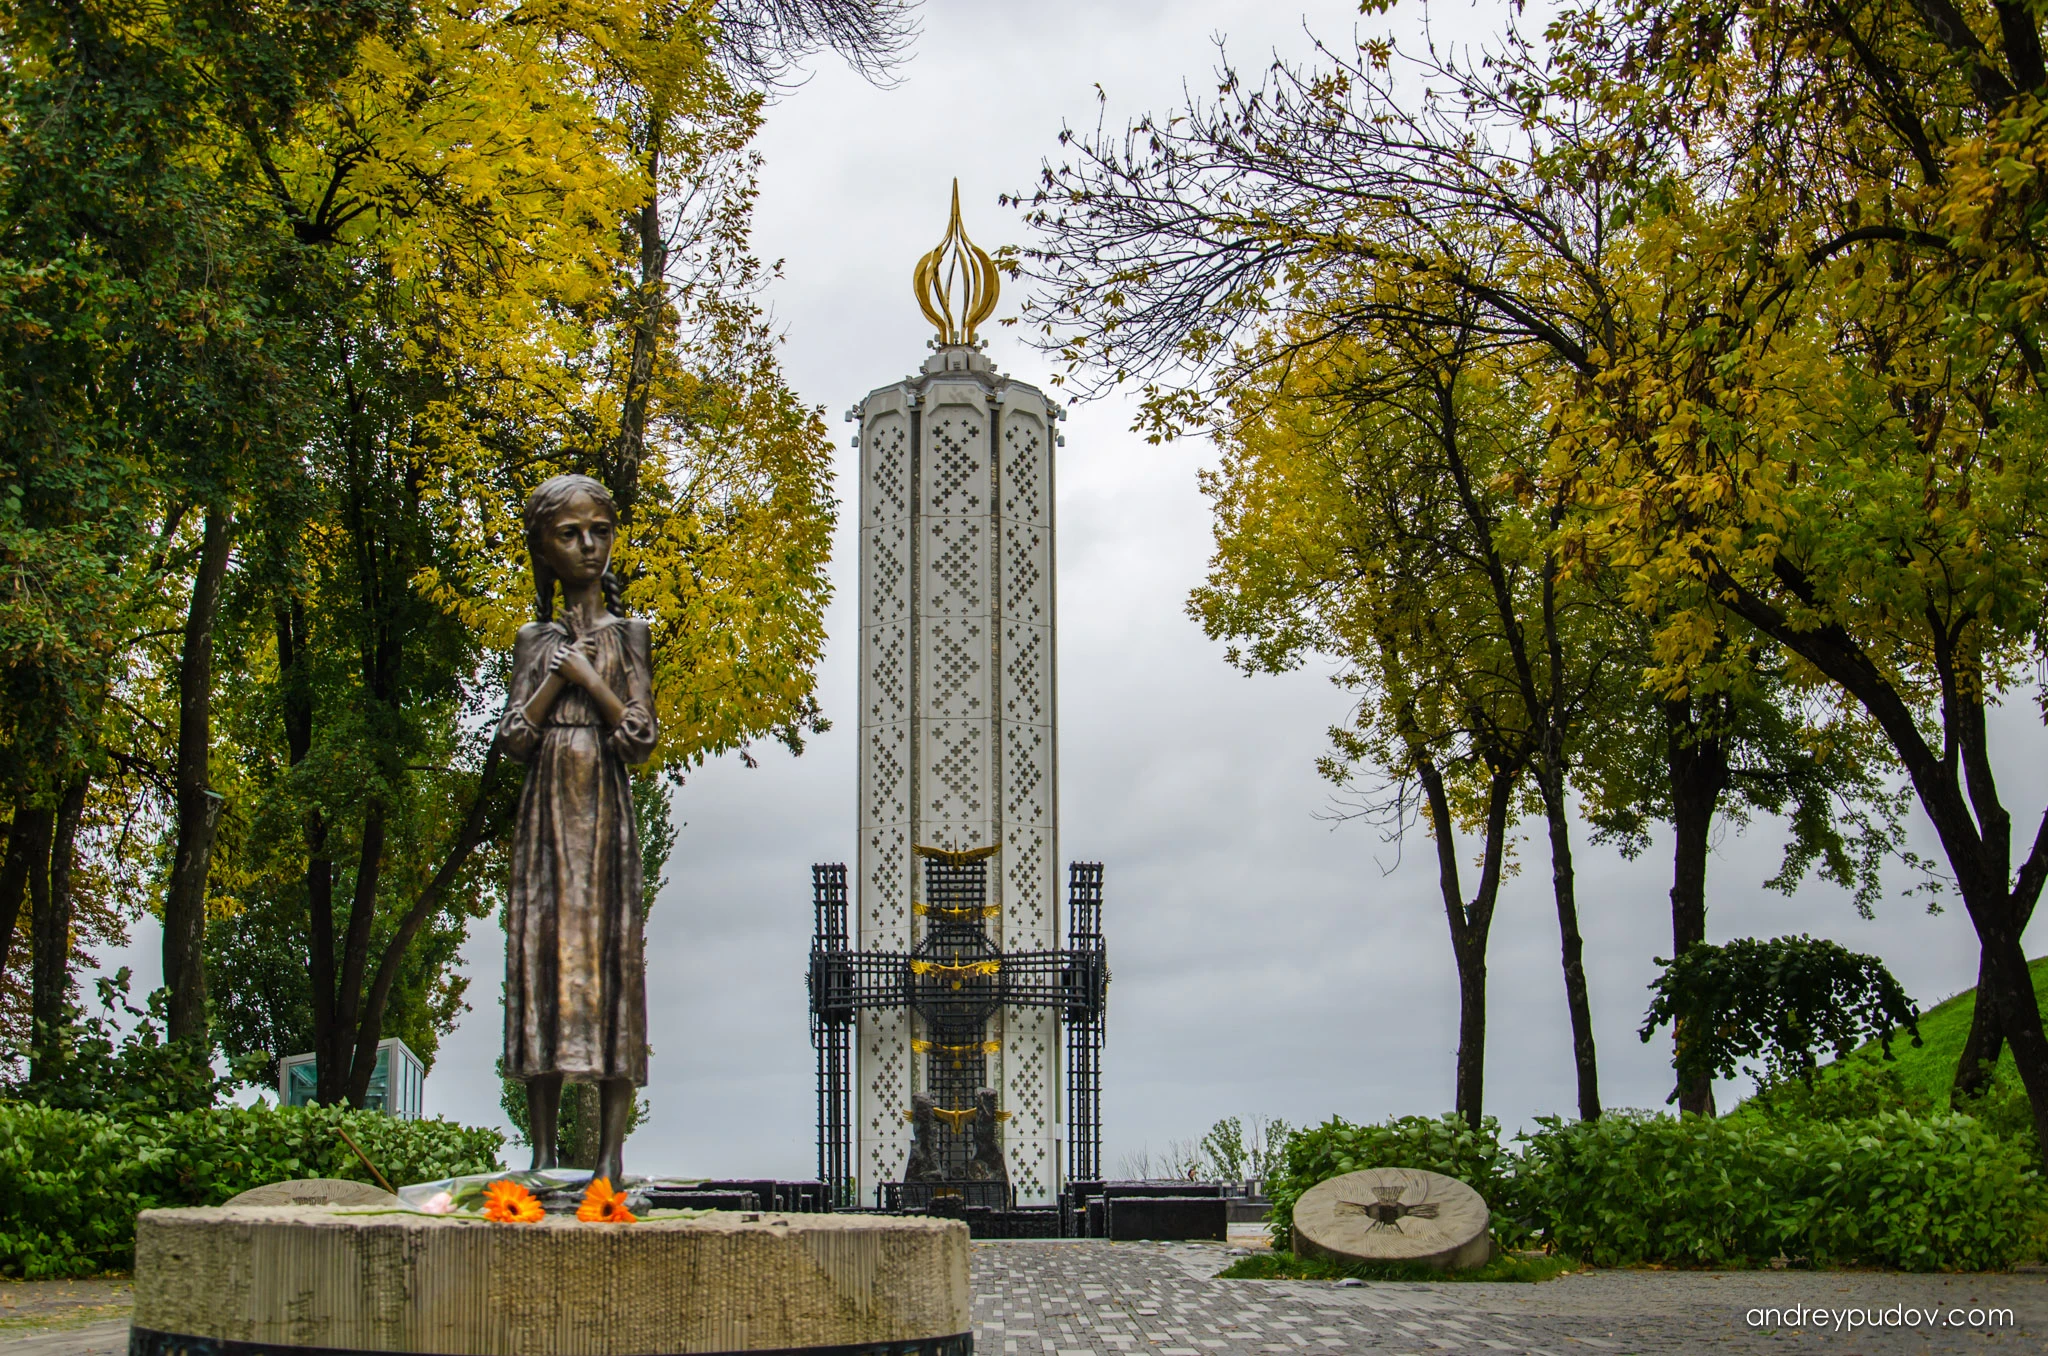 Little Russia - Memorial to the victims of the Holodomor. The Holodomor also known as the Terror-Famine and sometimes referred to as the Great Famine, was a famine in Soviet Ukraine from 1932 to 1933 that killed millions of Ukrainians. As part of the wider Soviet famine of 1932–1933 which affected the major grain-producing areas of the country, millions of inhabitants of Ukraine died of starvation in a peacetime catastrophe unprecedented in the history of Ukraine. Since 2006, the Holodomor has been recognized by Ukraine and 15 other countries as a genocide of the Ukrainian people carried out by the Soviet government.